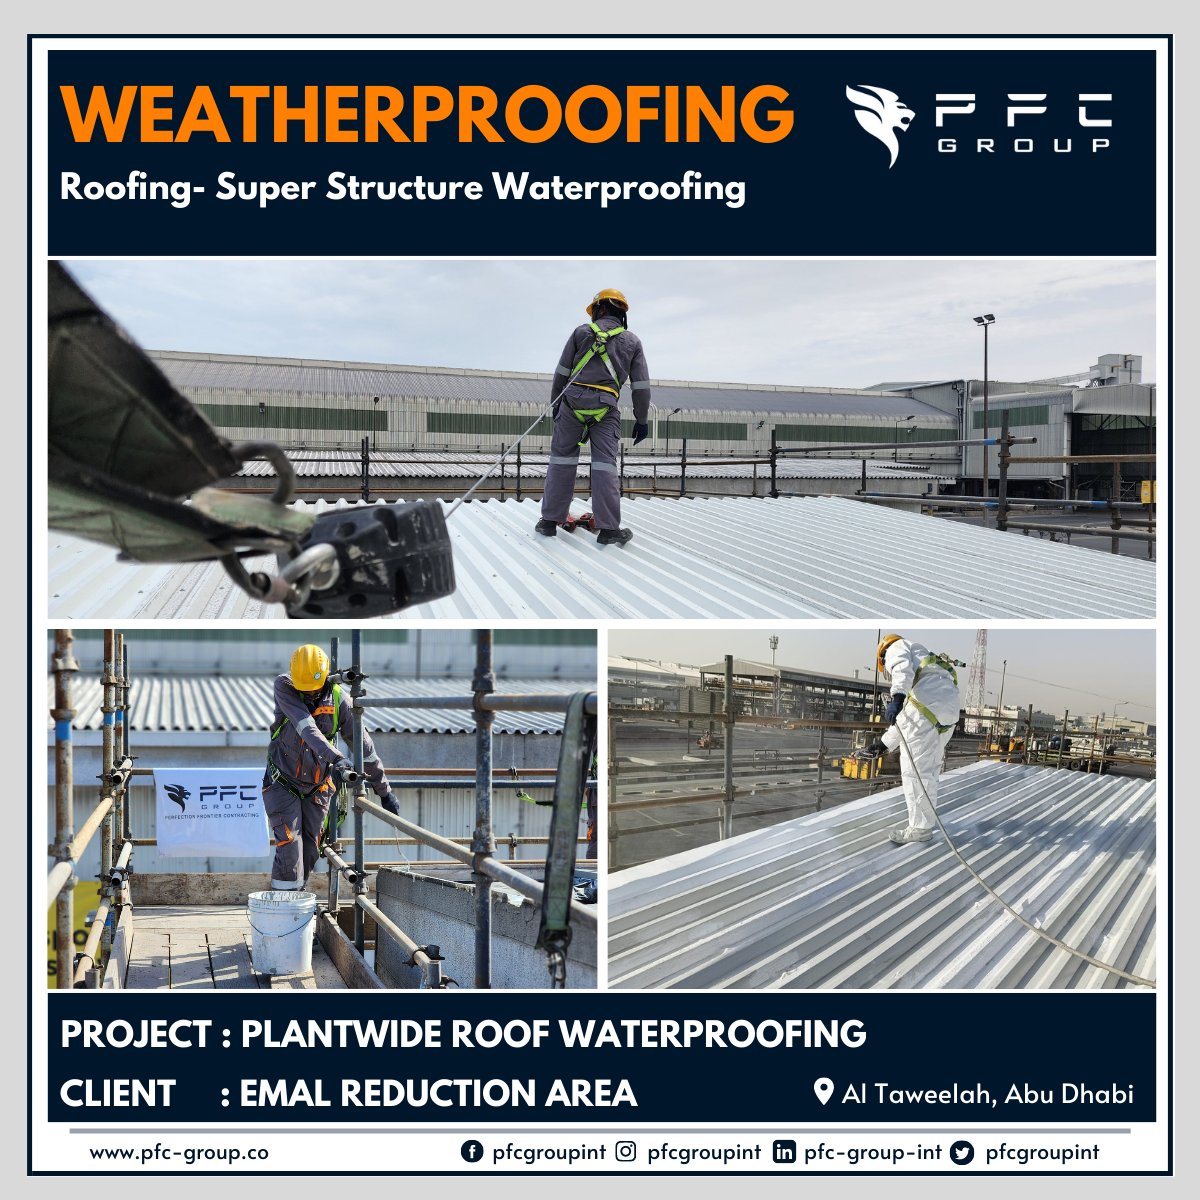 PFC Group has expertise in Weatherproofing Solutions across UAE, PFC Group has successfully finished the Super Structure Waterproofing Works at Al Taweelah, Abu Dhabi.

#Waterproofing #RoofStructure #SuperStructureWaterproofing #Roofing #ReductionArea #Weatherproofing #PFC